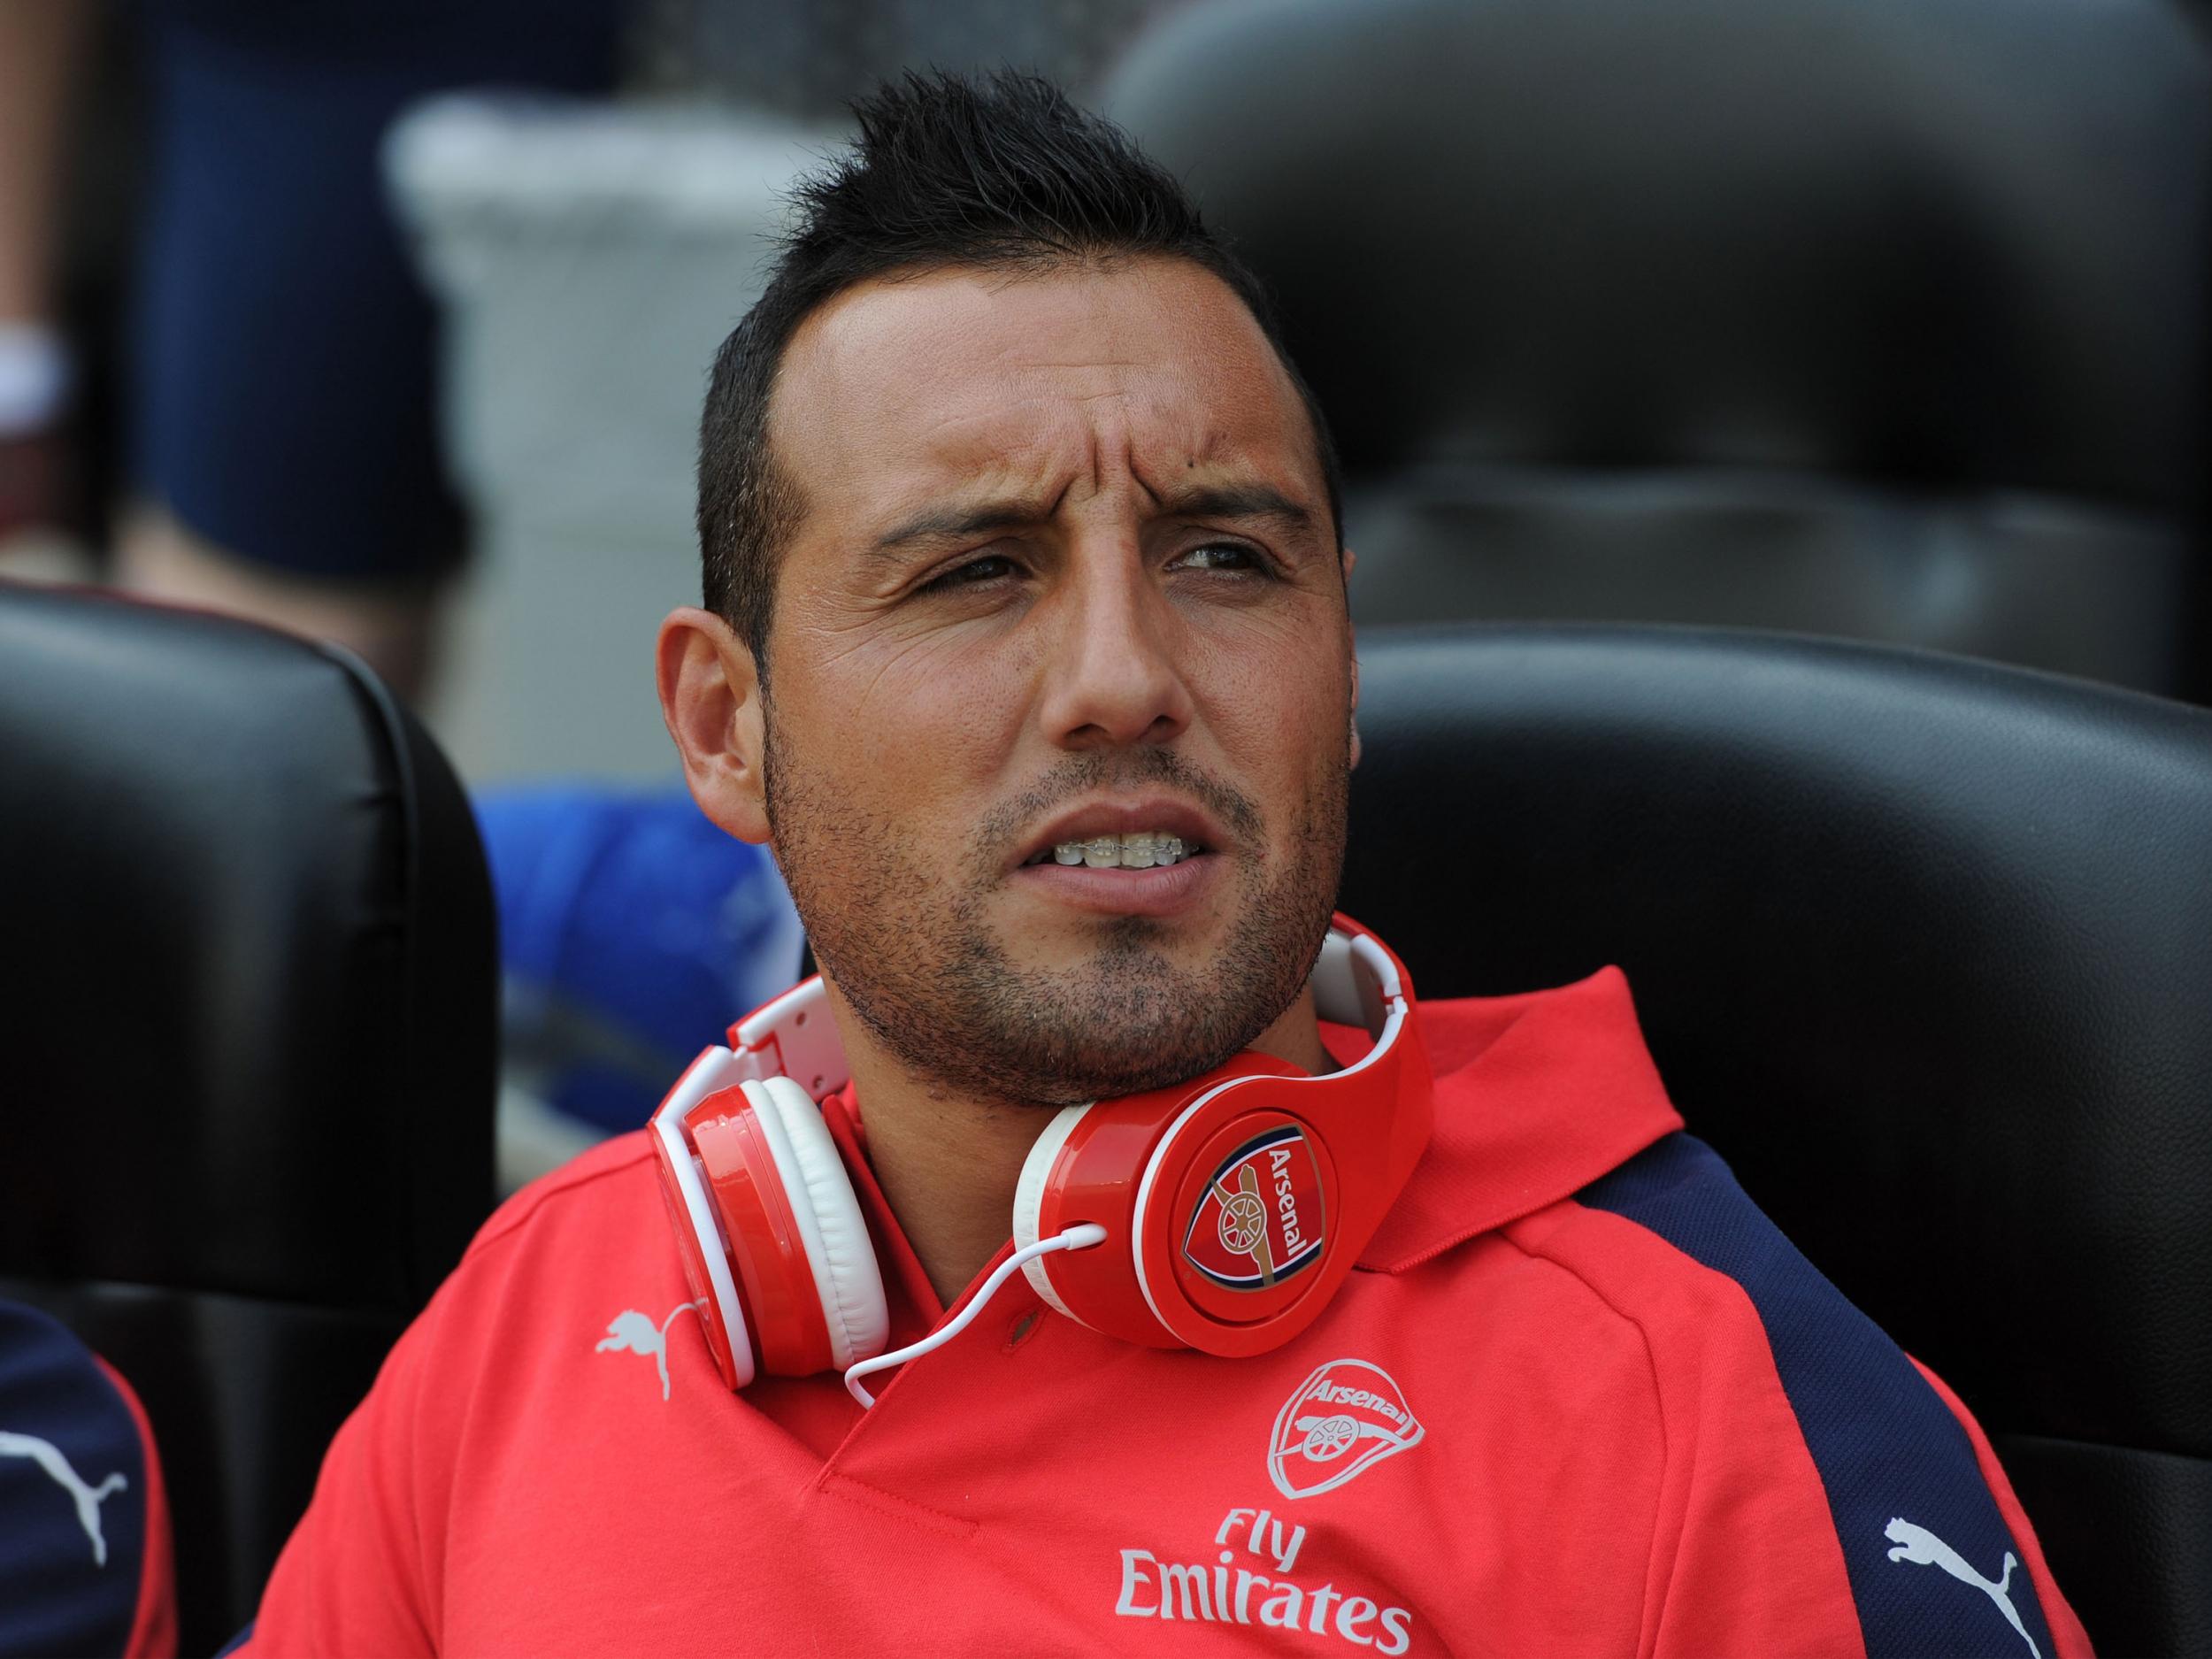 Santi Cazorla could miss the entire season after having a ninth operation